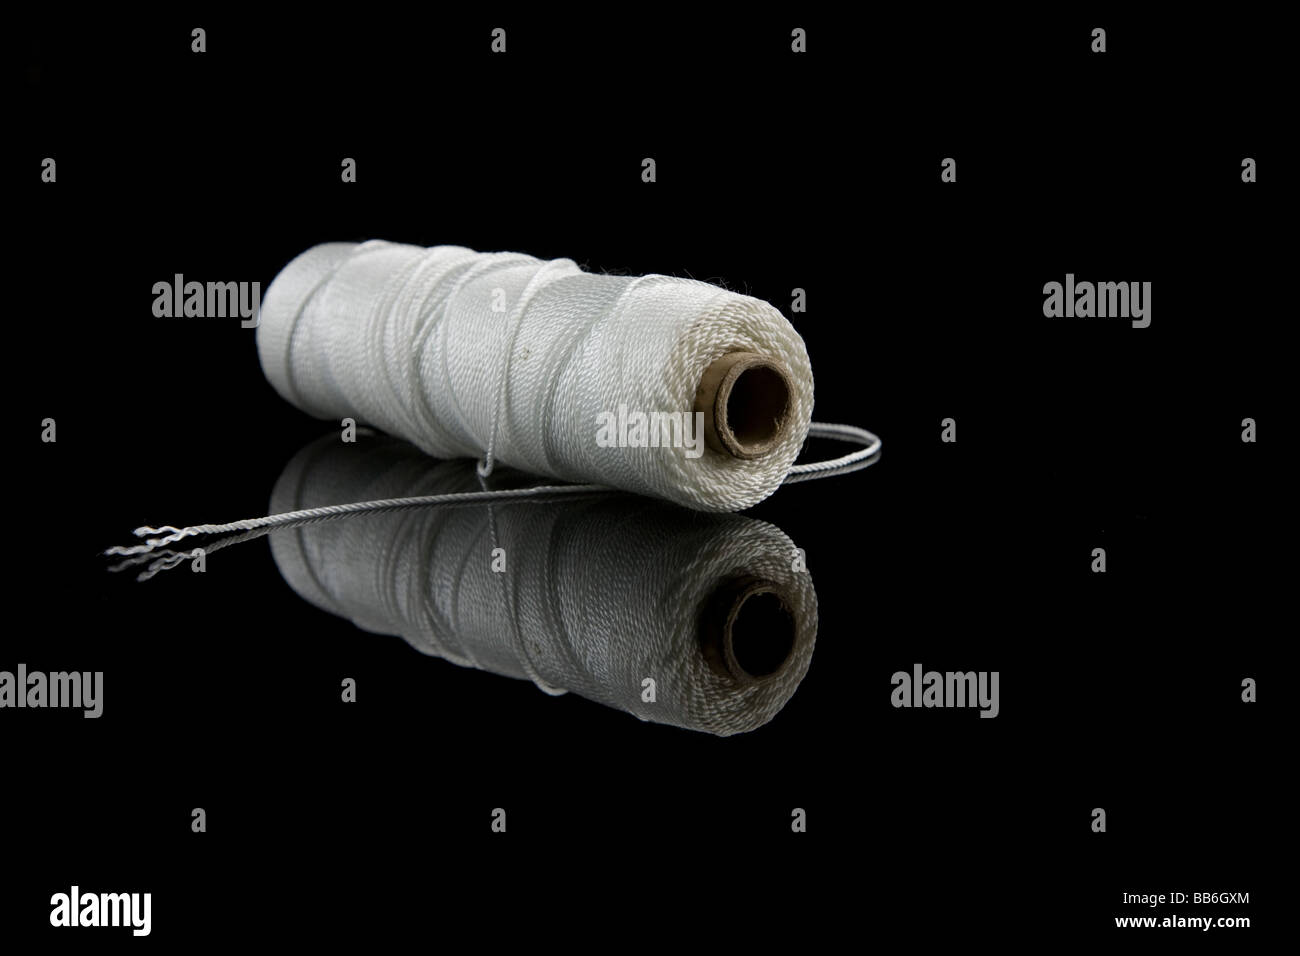 A reel of string or cotton Stock Photo